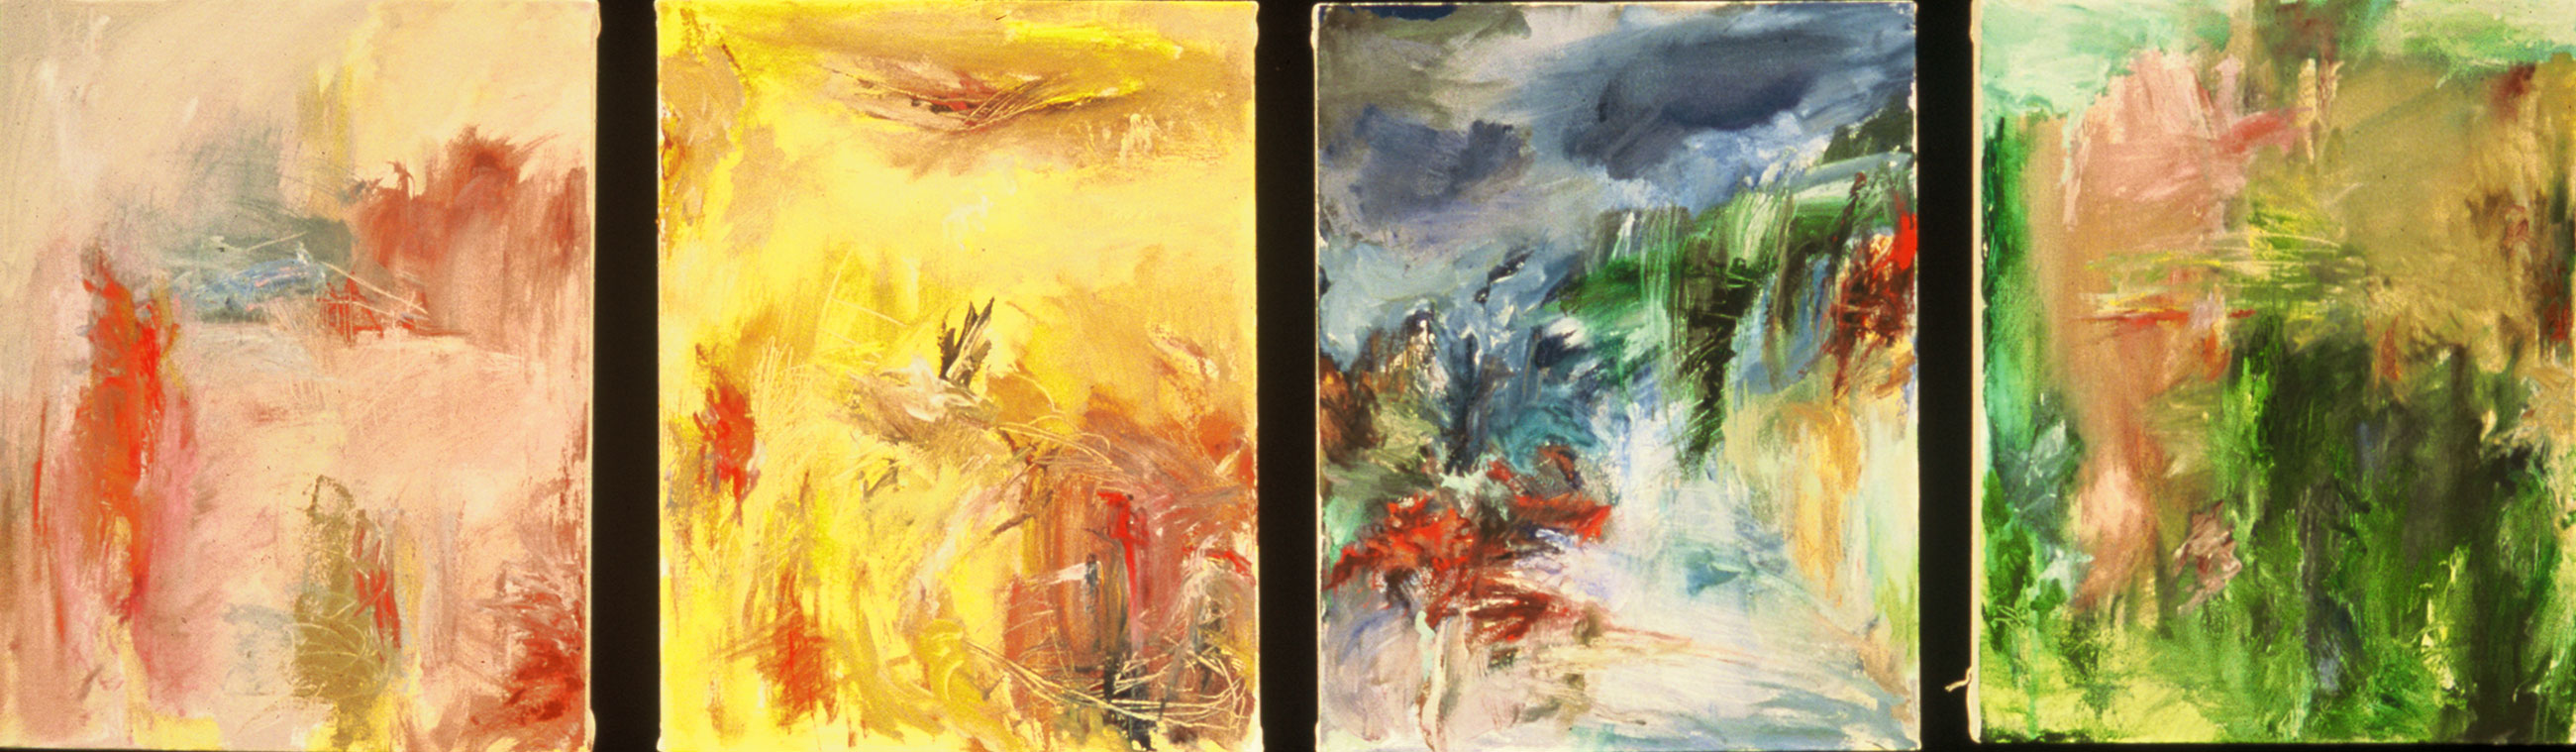 Other Spaces 1-4 - Oil - 20in x 16in each - 1997 - <a href="https://mgpainter.com/contact">Available</a>